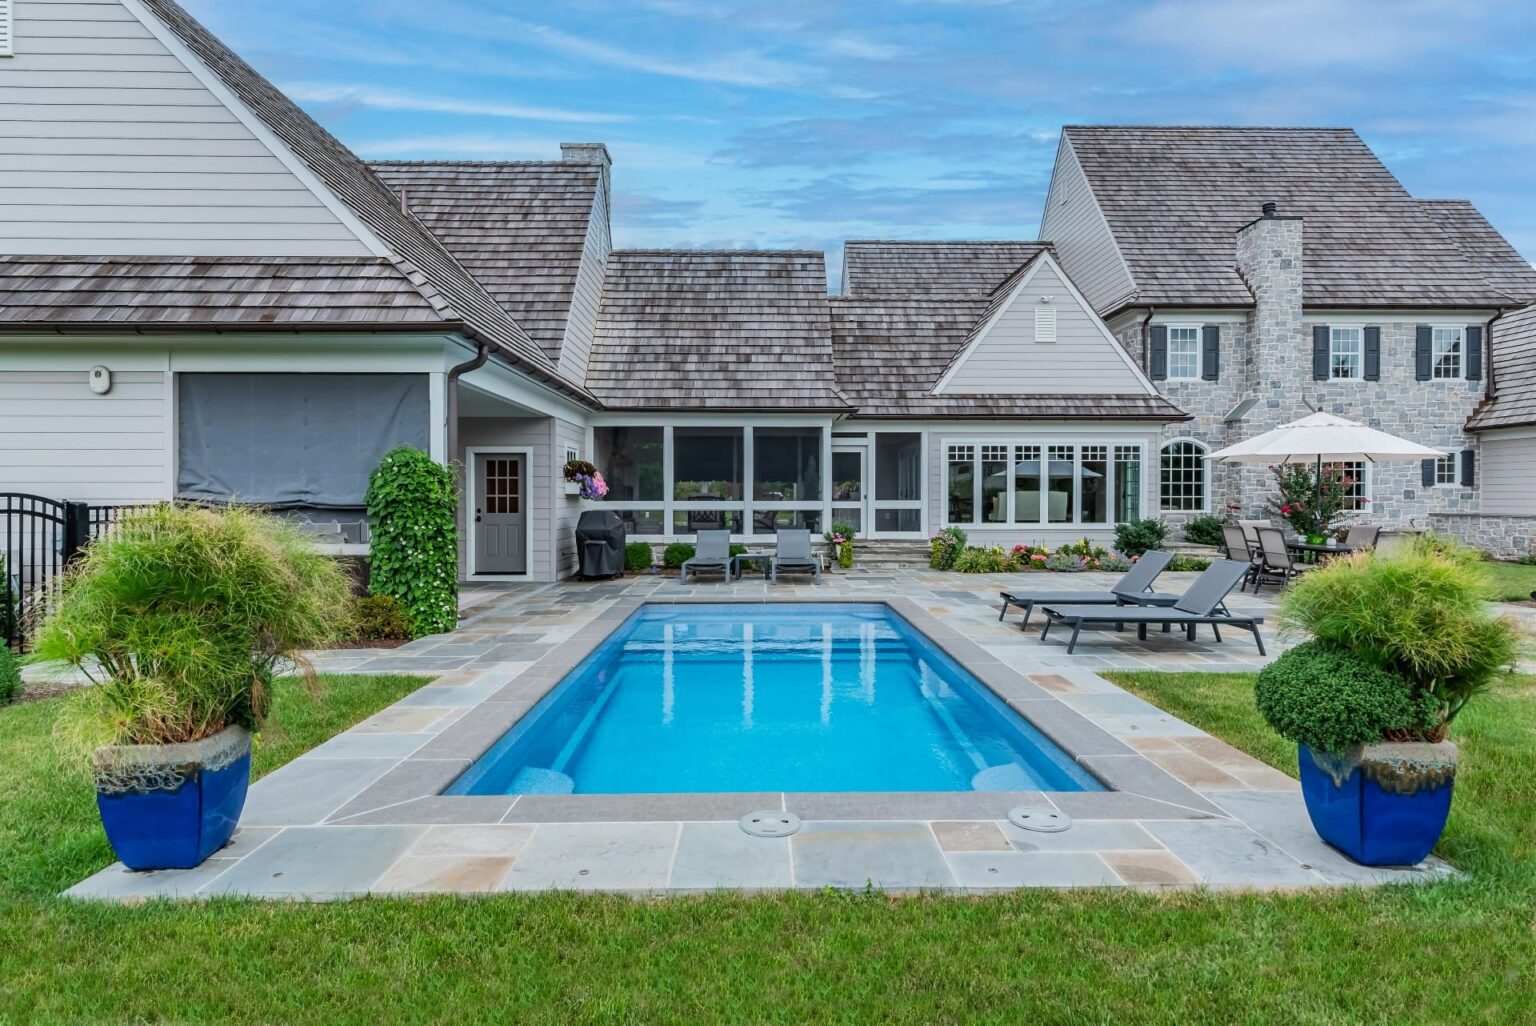 Why Professional Pool Closing Makes All the Difference